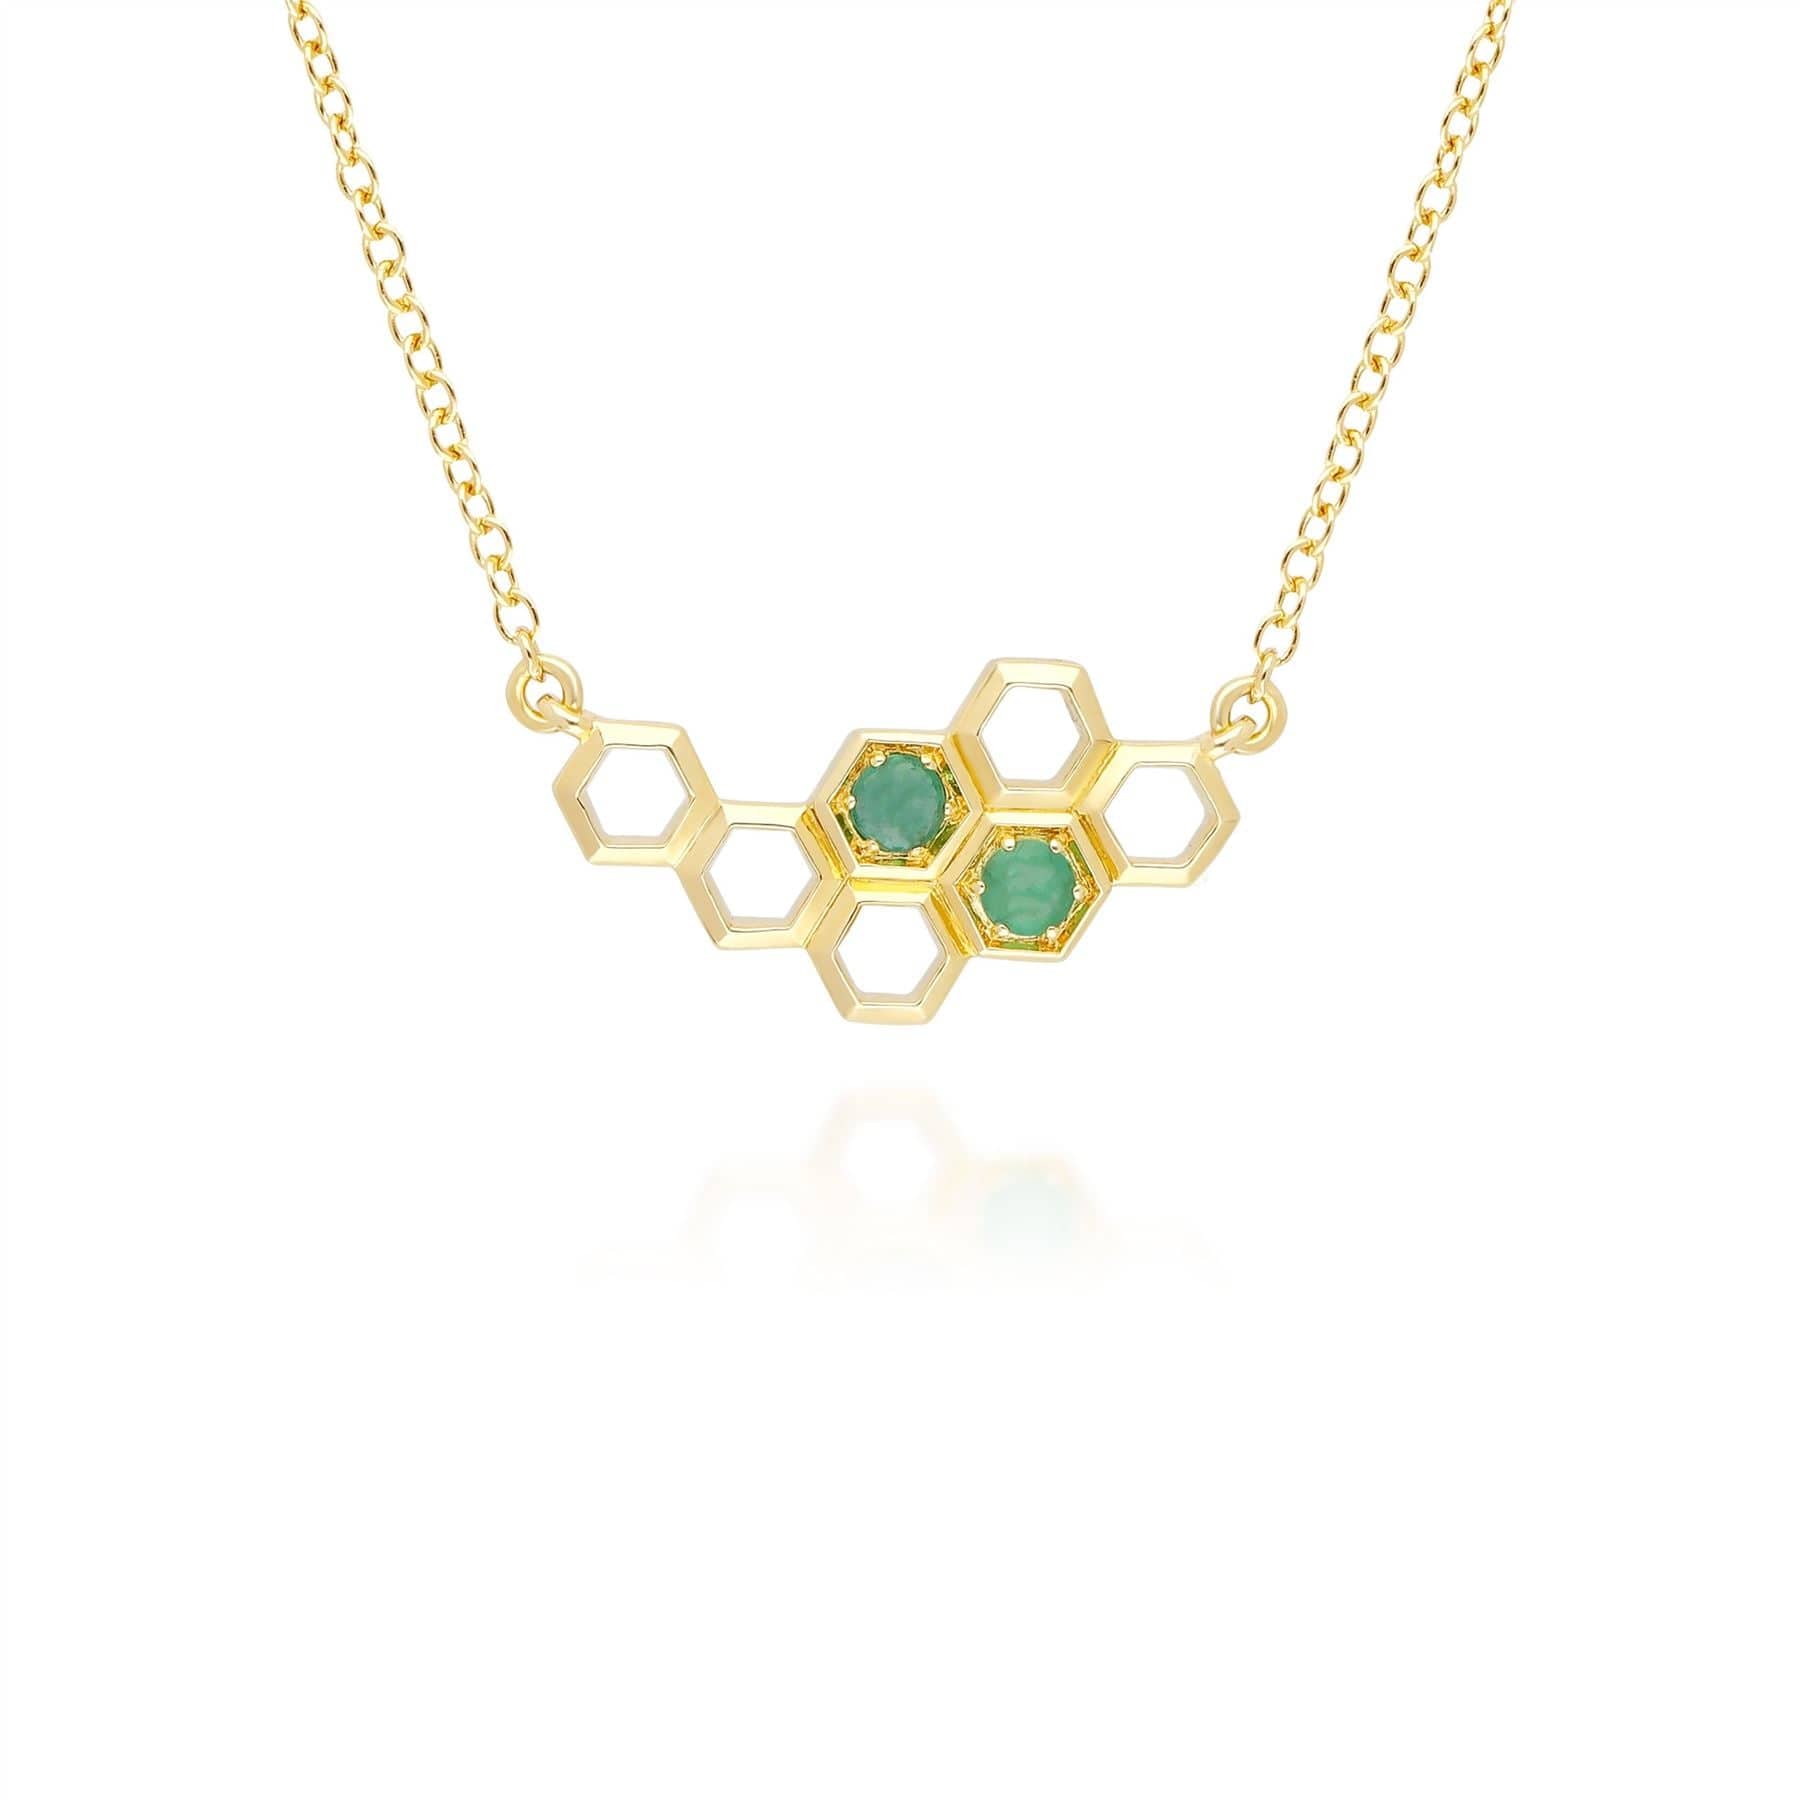 Honeycomb Inspired Emerald Link Necklace in 9ct Yellow Gold - Gemondo